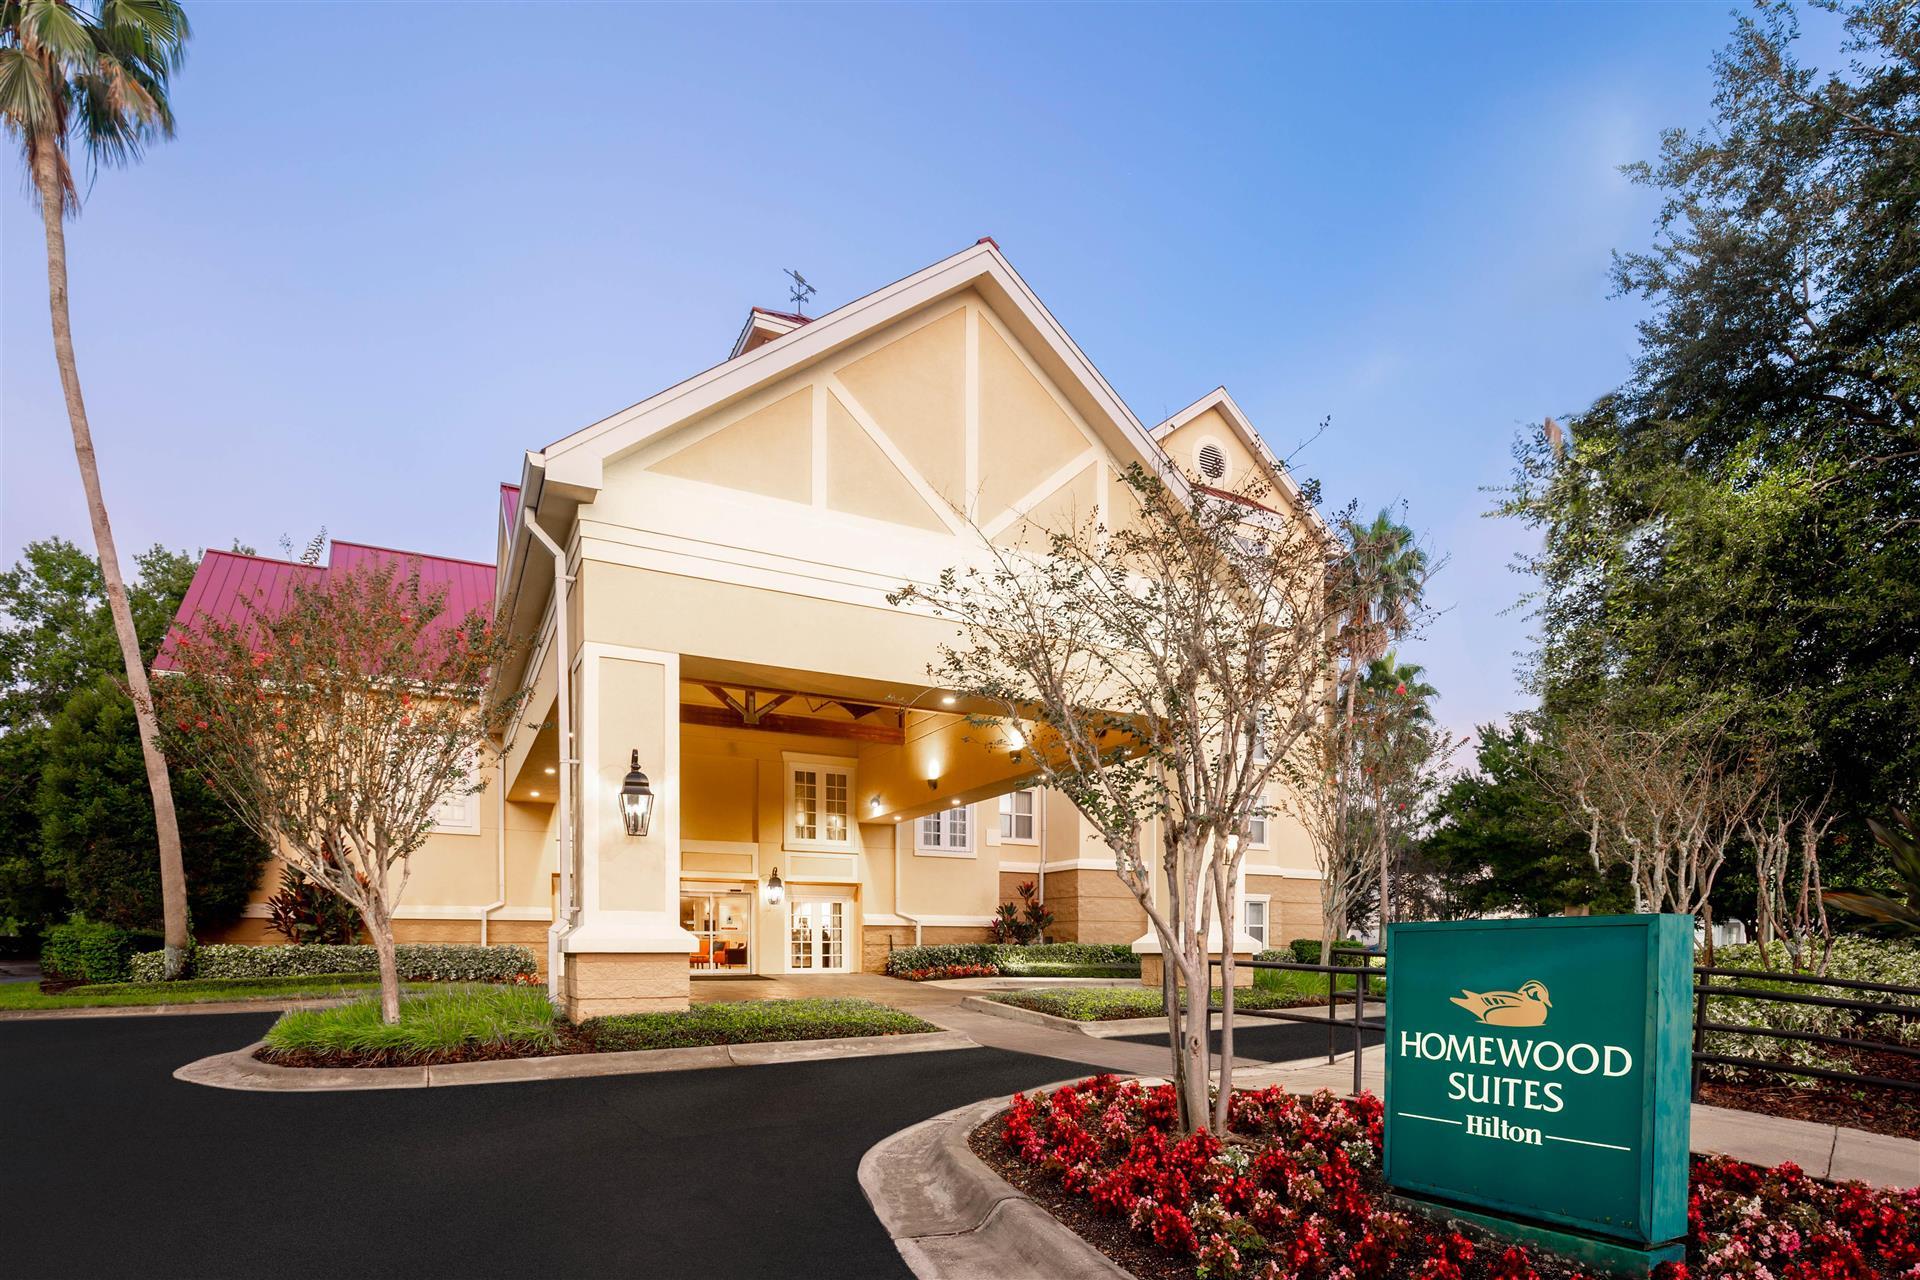 Homewood Suites by Hilton Lake Mary in Lake Mary, FL